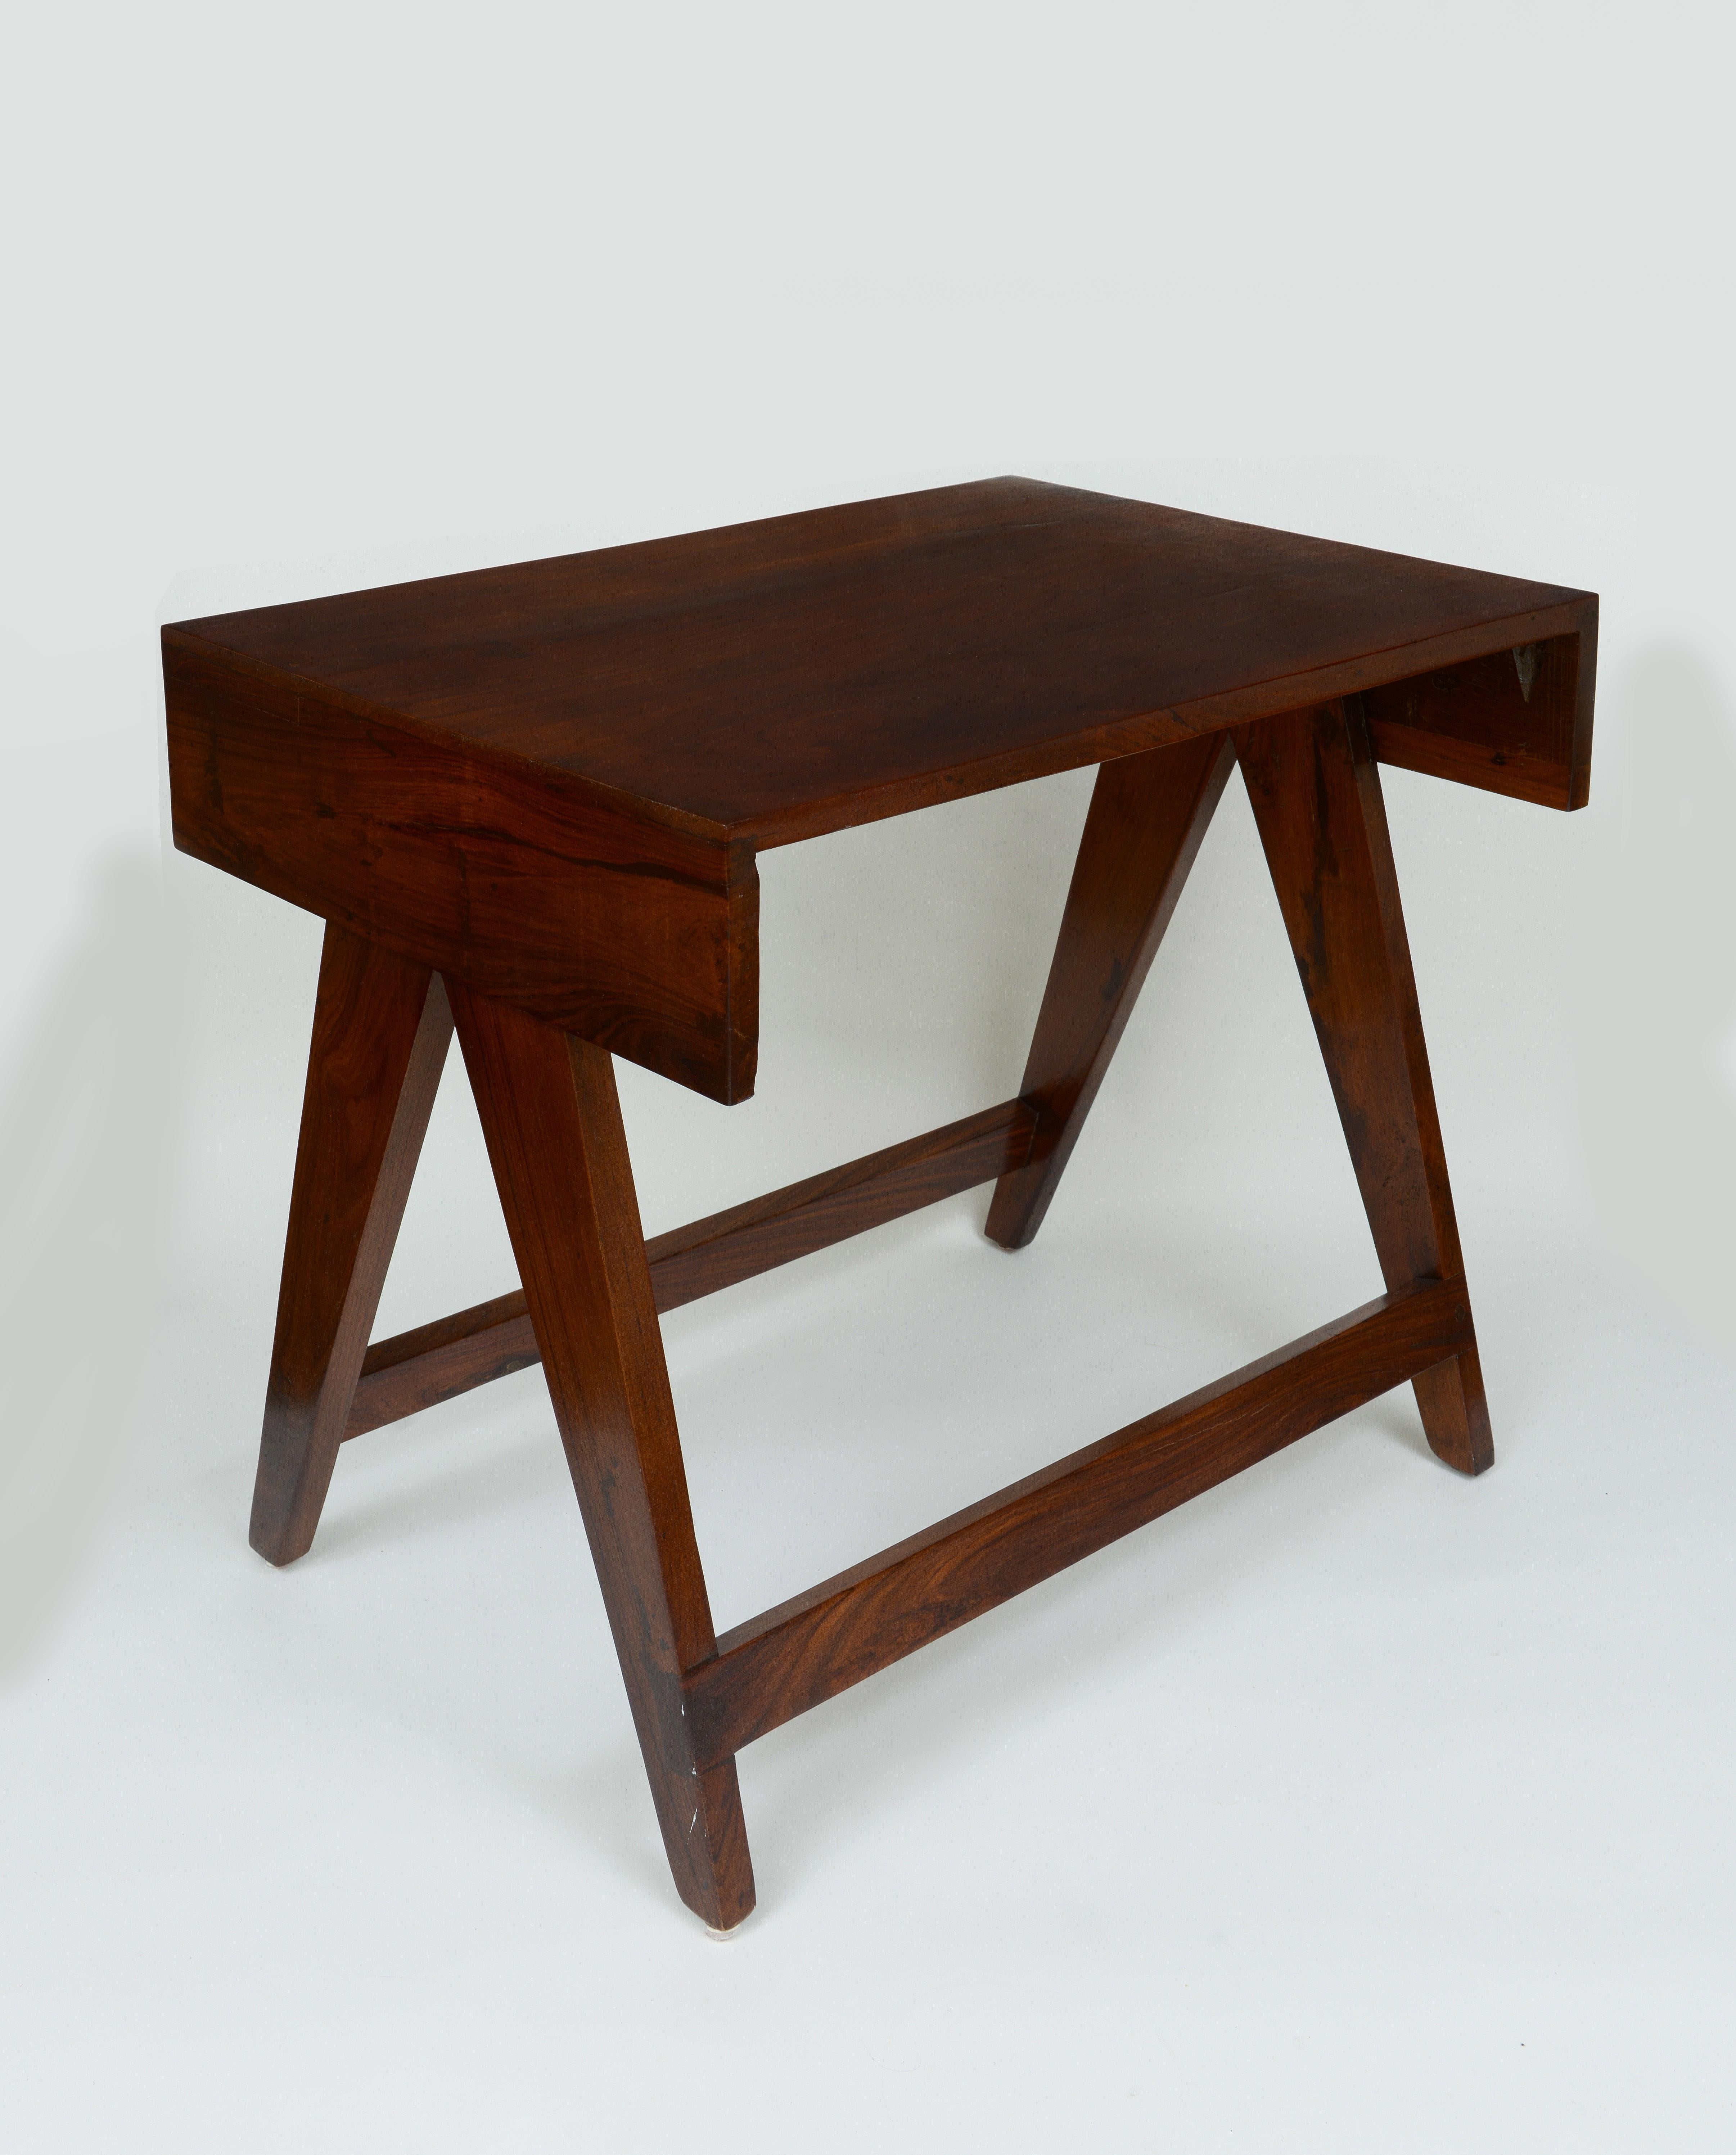 Pierre Jeanneret Desk and Stool from the city of Chandigarh, India 1950 - 1959 Teak Holland and Sherry boiled wool.

Desk: 27 H x 31.5 W x 23 D inches 
Stool: 16 H x 16 W x 13 D inches